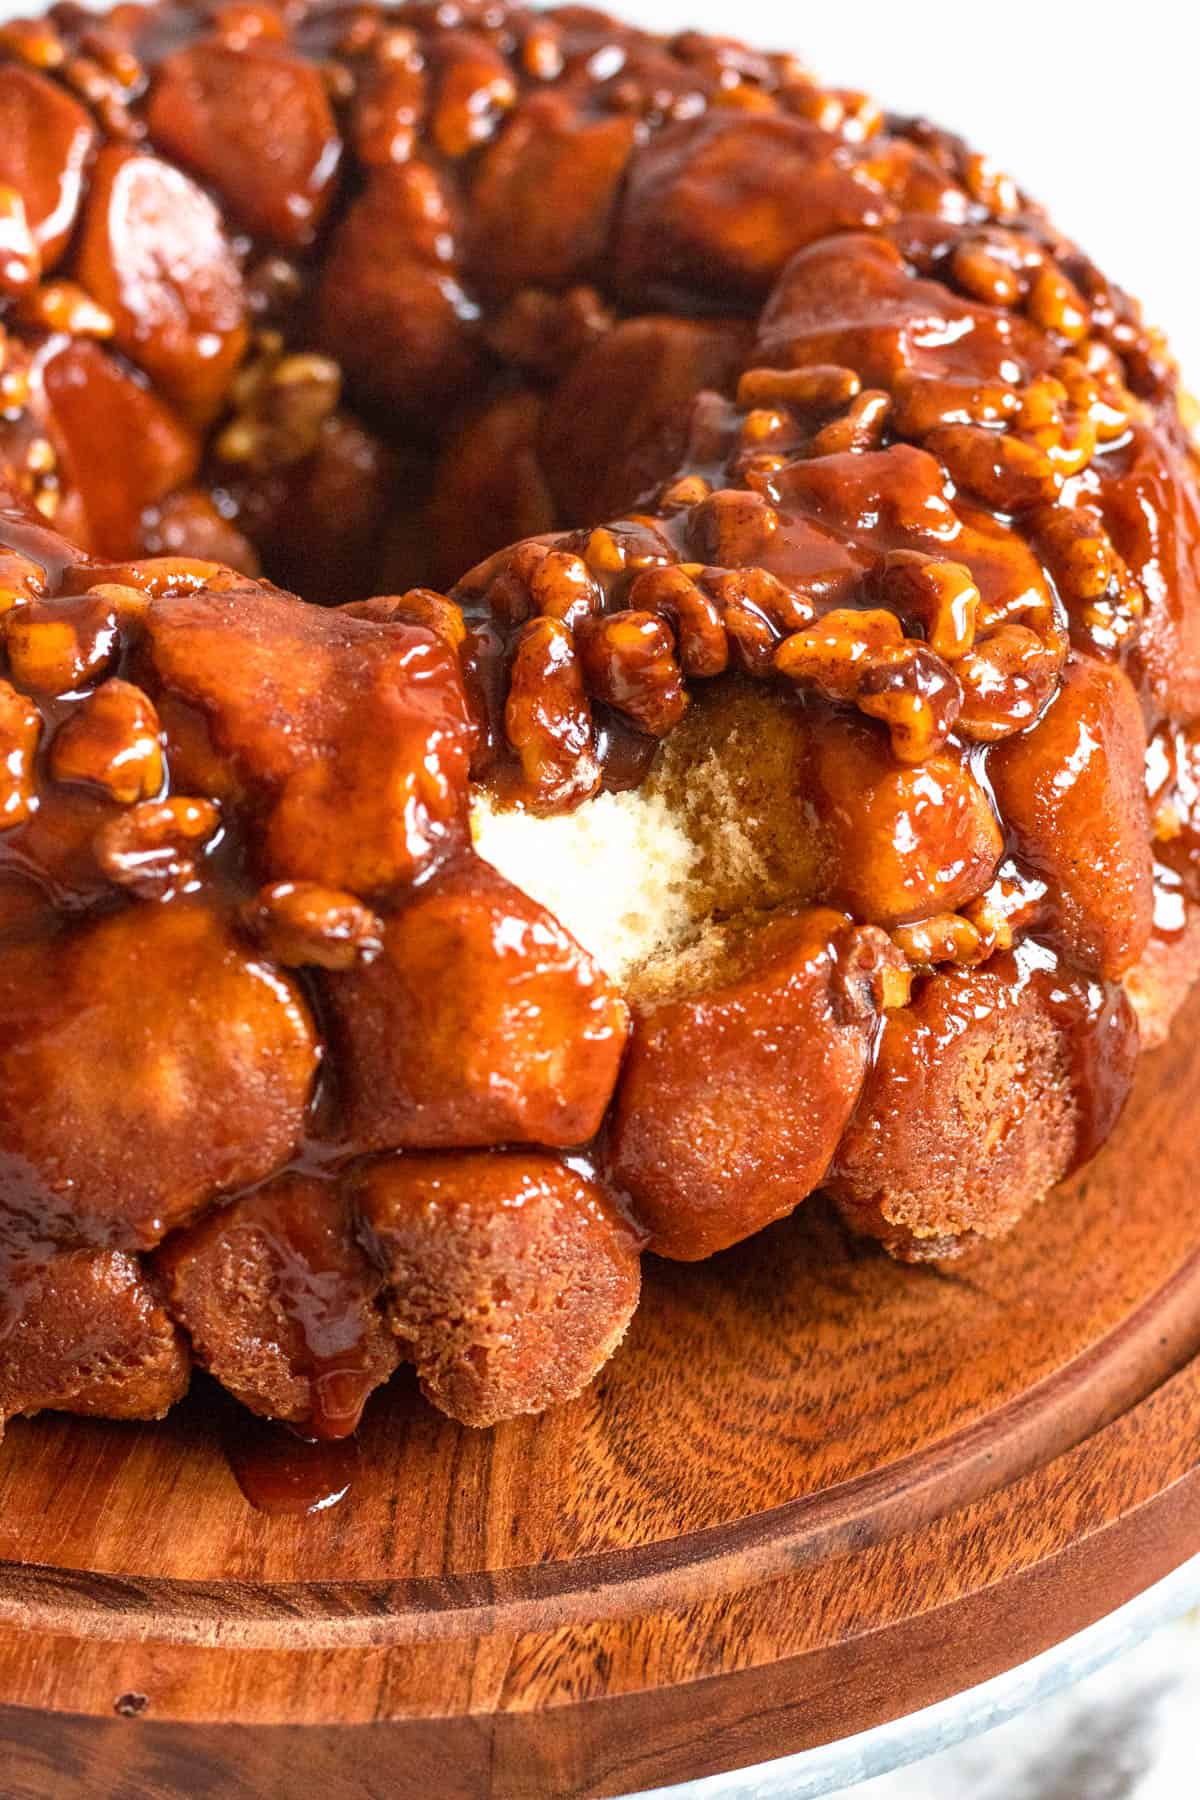 Monkey bread with a piece pulled out showing the baked bread and caramelized pecans inside. 